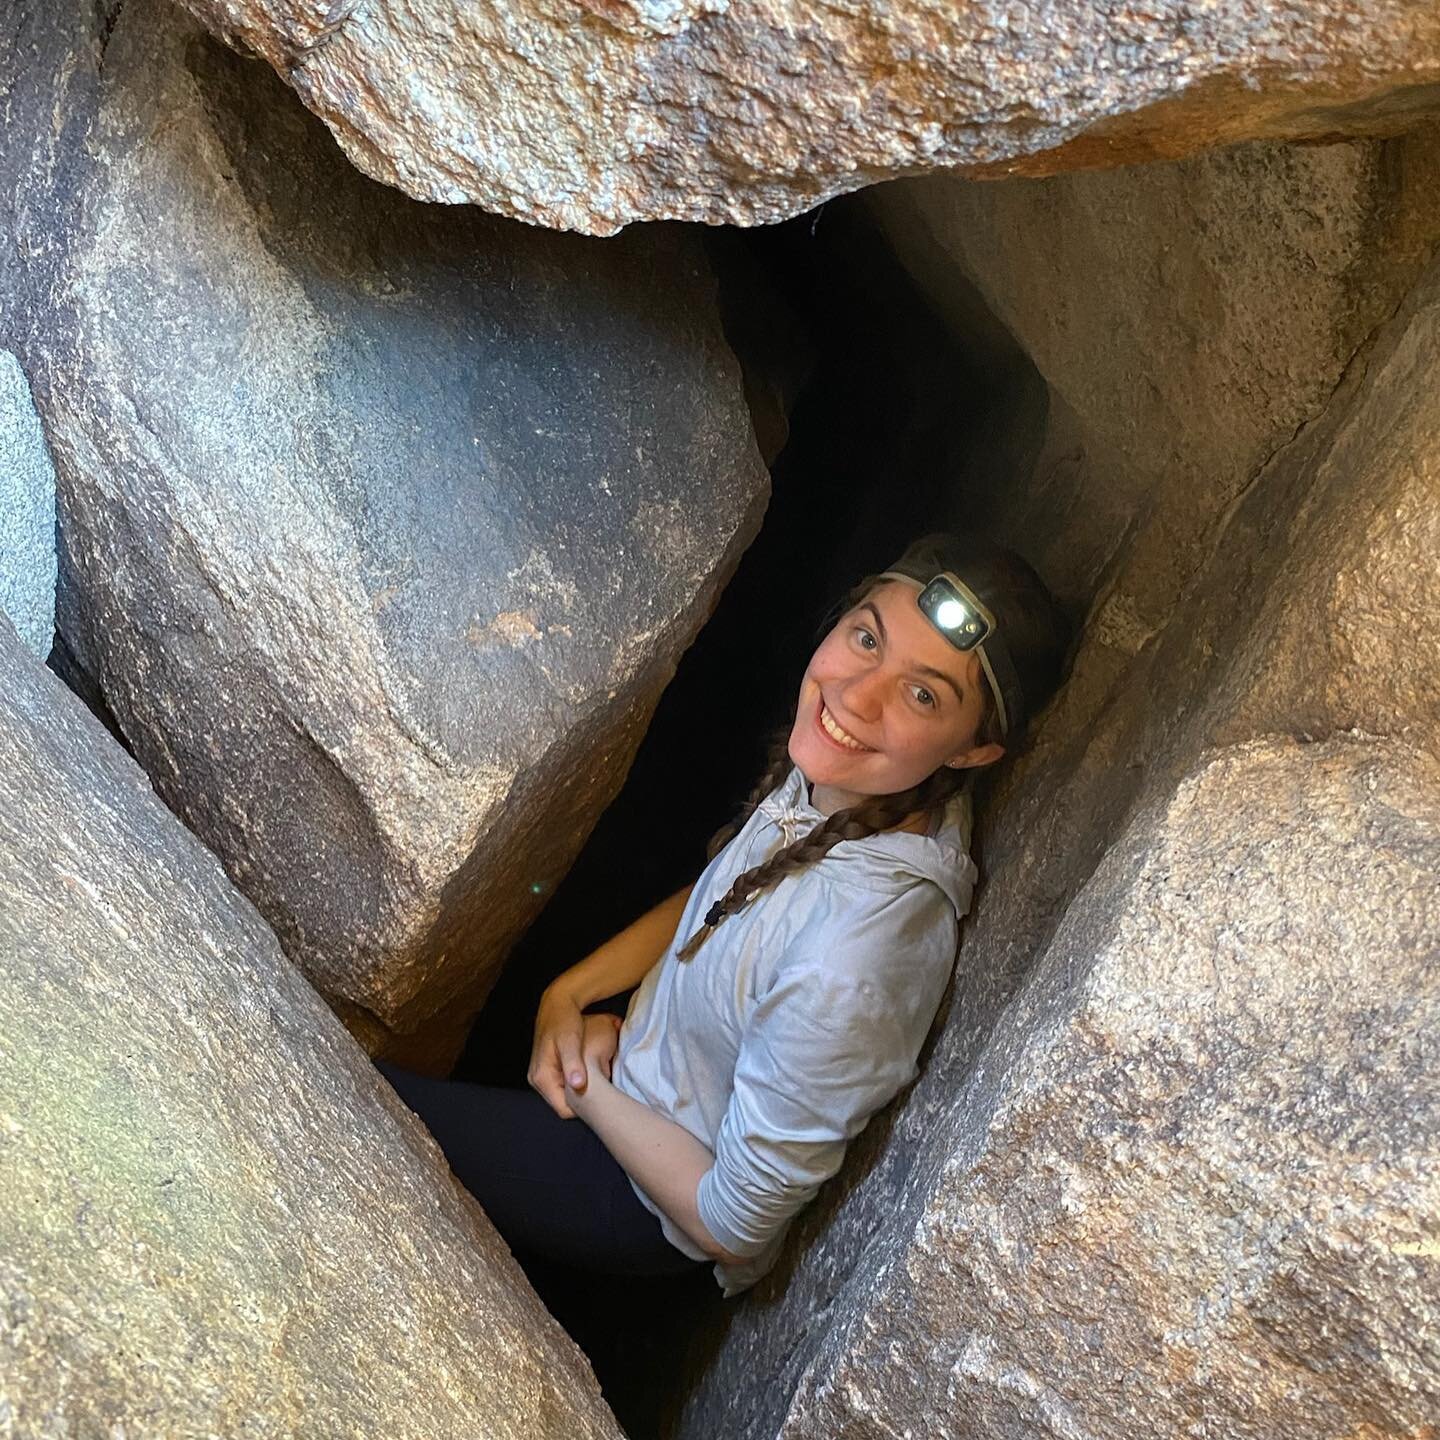 Our guides have been busy the past couple of weeks preparing for basecamp! Are you ready to ROCK with us this weekend? Yes, that pun was intended. No, I will not stop with the dad jokes. 

Get PUMPED for basecamp!
🪨🌵⛺️🧗&zwj;♀️